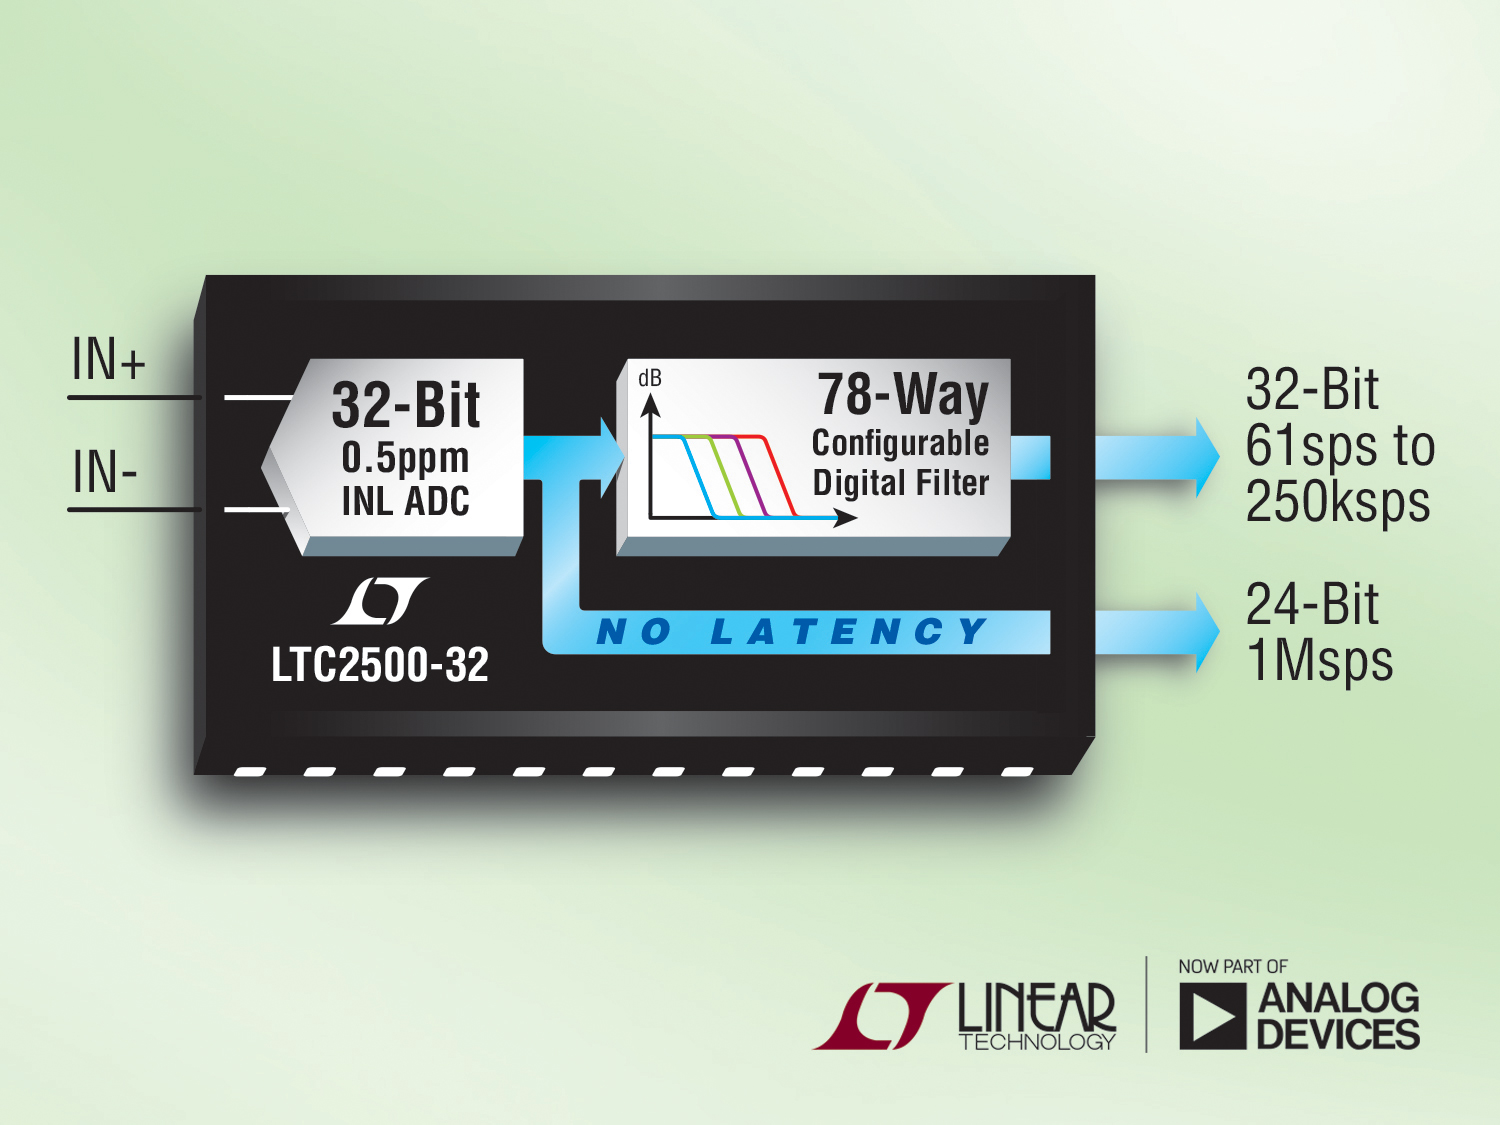 32-Bit SAR ADC with 0.5ppm Linearity Provides 148dB Dynamic Range